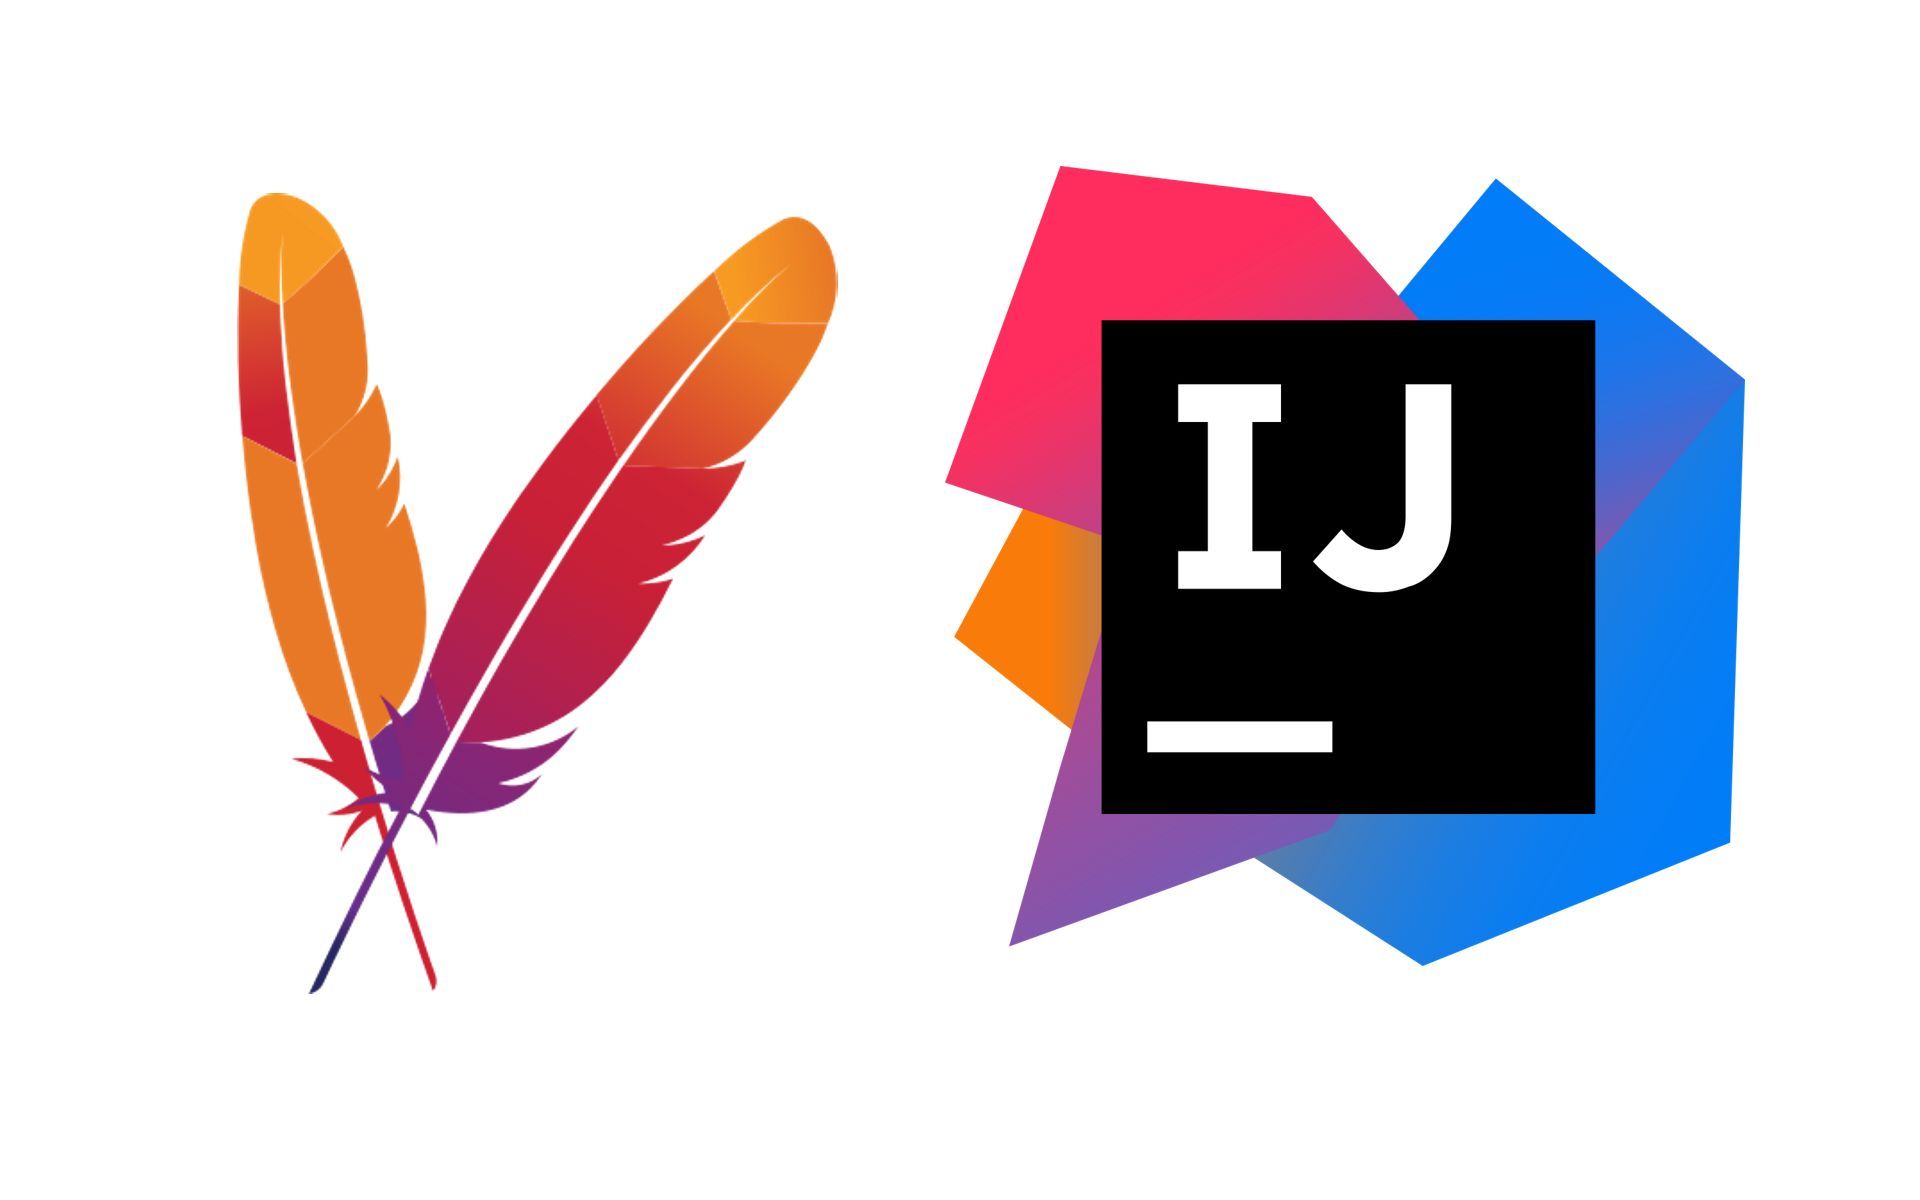 IntelliJ Maven Plugin Issues and Solutions